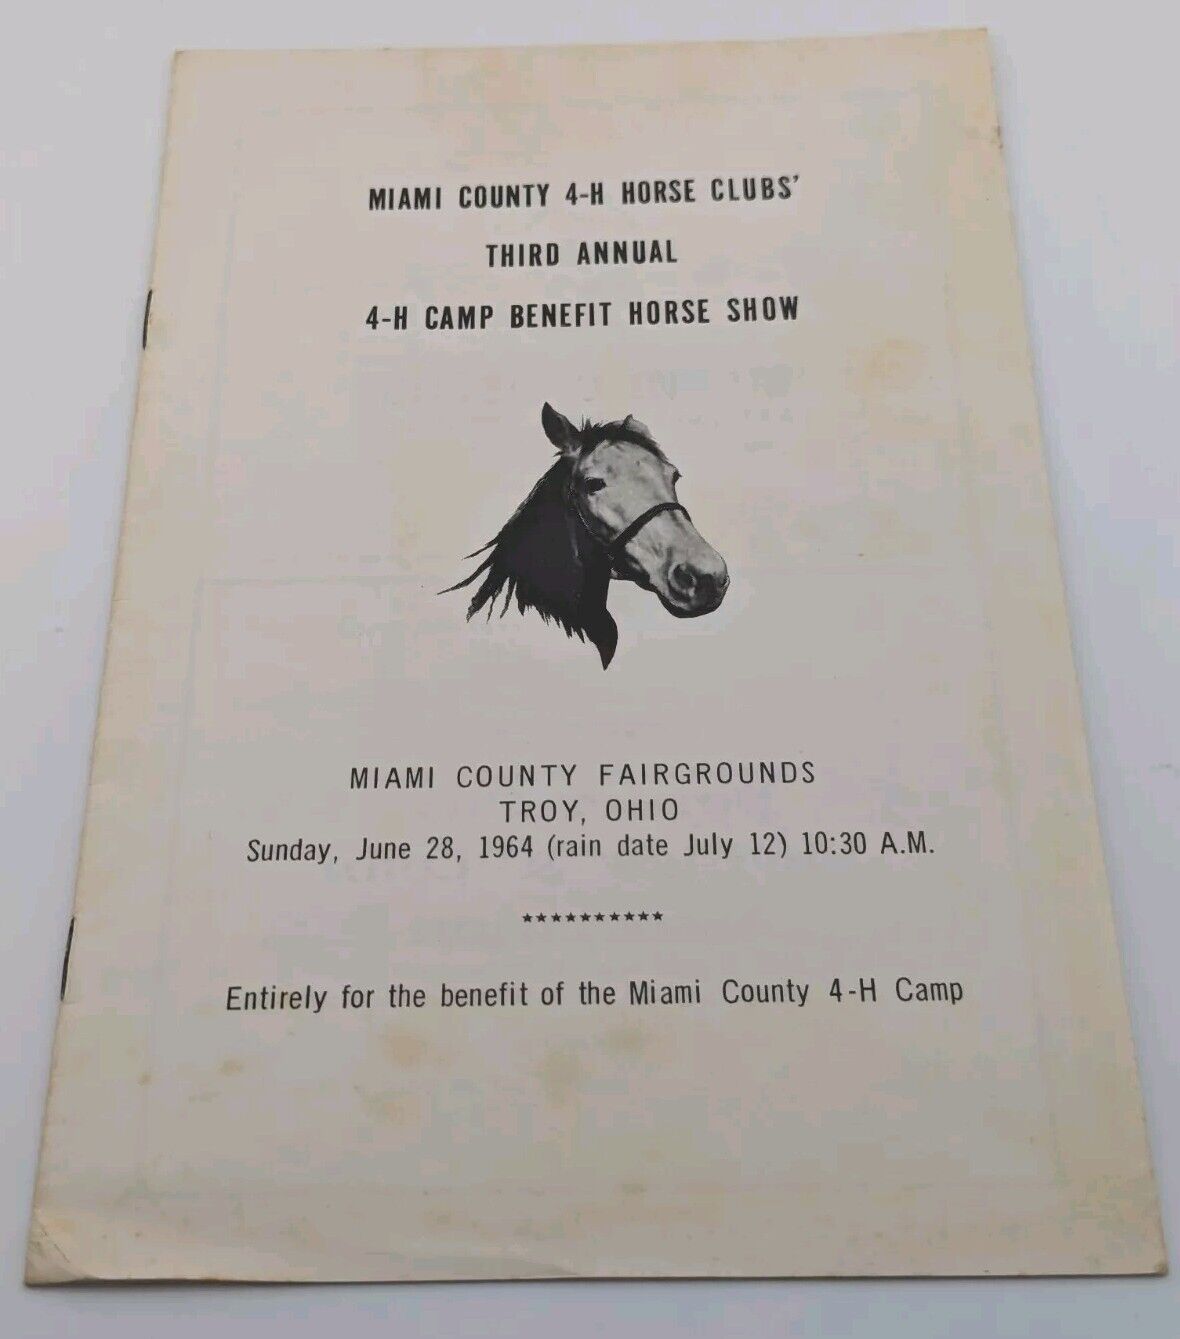 1964 4-H 3RD ANNUAL HORSE CLUB SHOW - MIAMI COUNTY FAIRGROUNDS - TROY OHIO